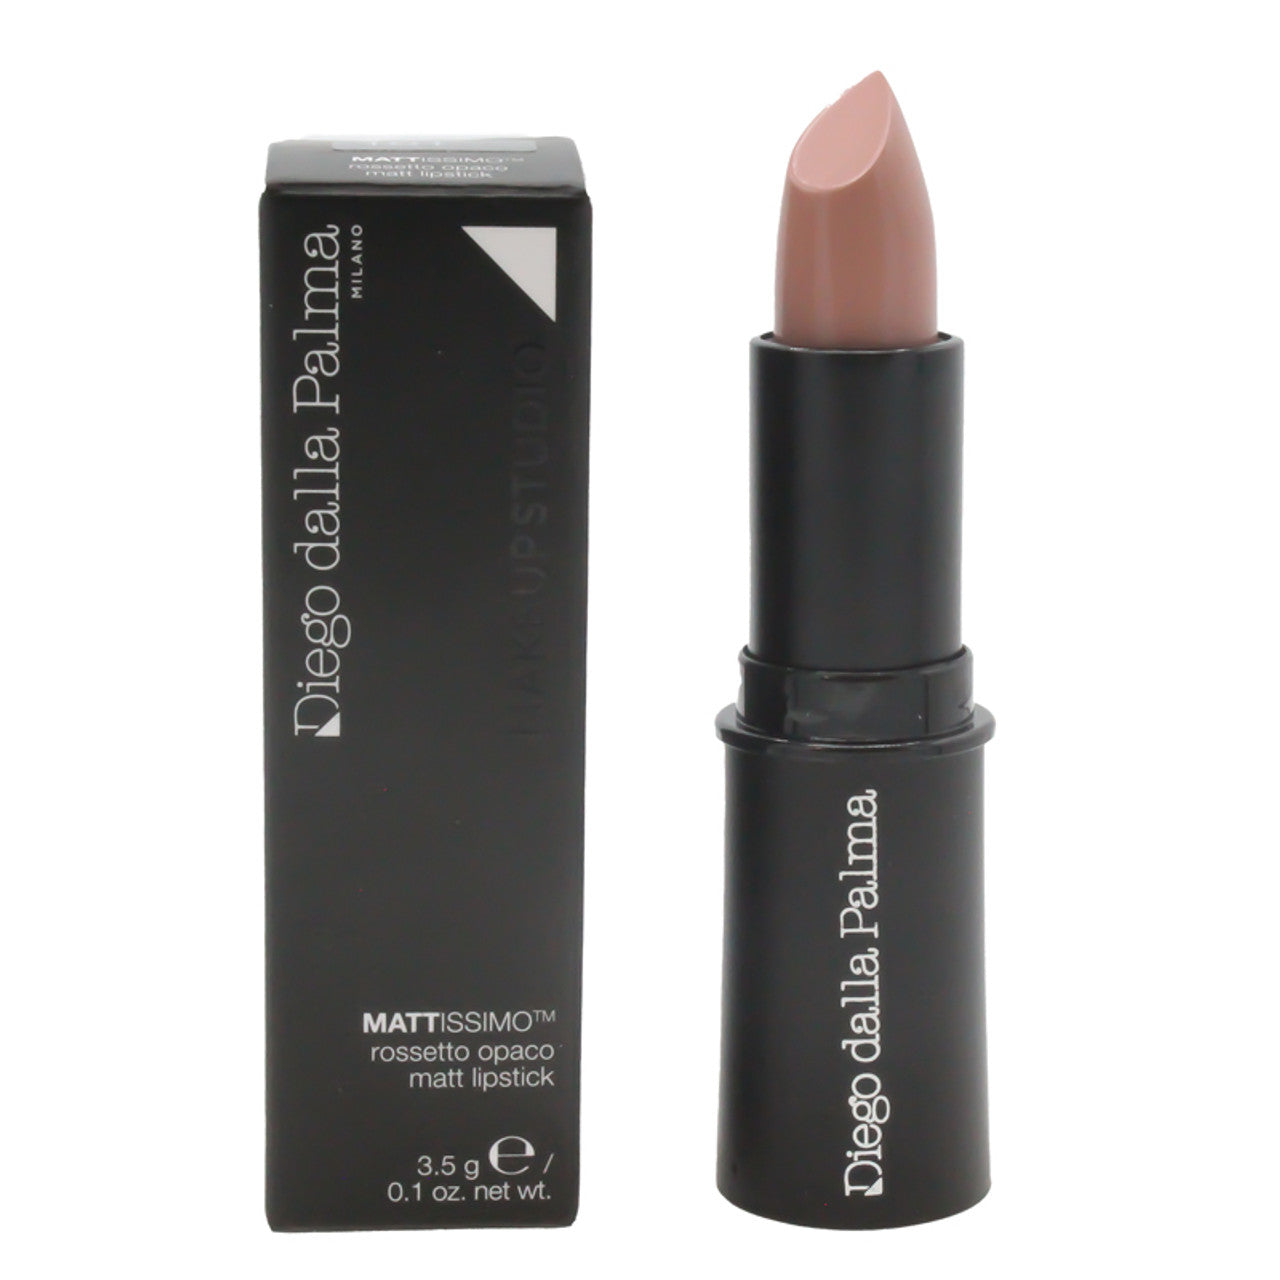 Diego Dalla Palma Mattissimo Matt Lipstick - 100% Natural Wax - Full Matte Finish - Instant Color Payoff - Intense And Pure Color - Highly Pigmented - Long Lasting Wear - #161 English Toffee - 0.1 Oz